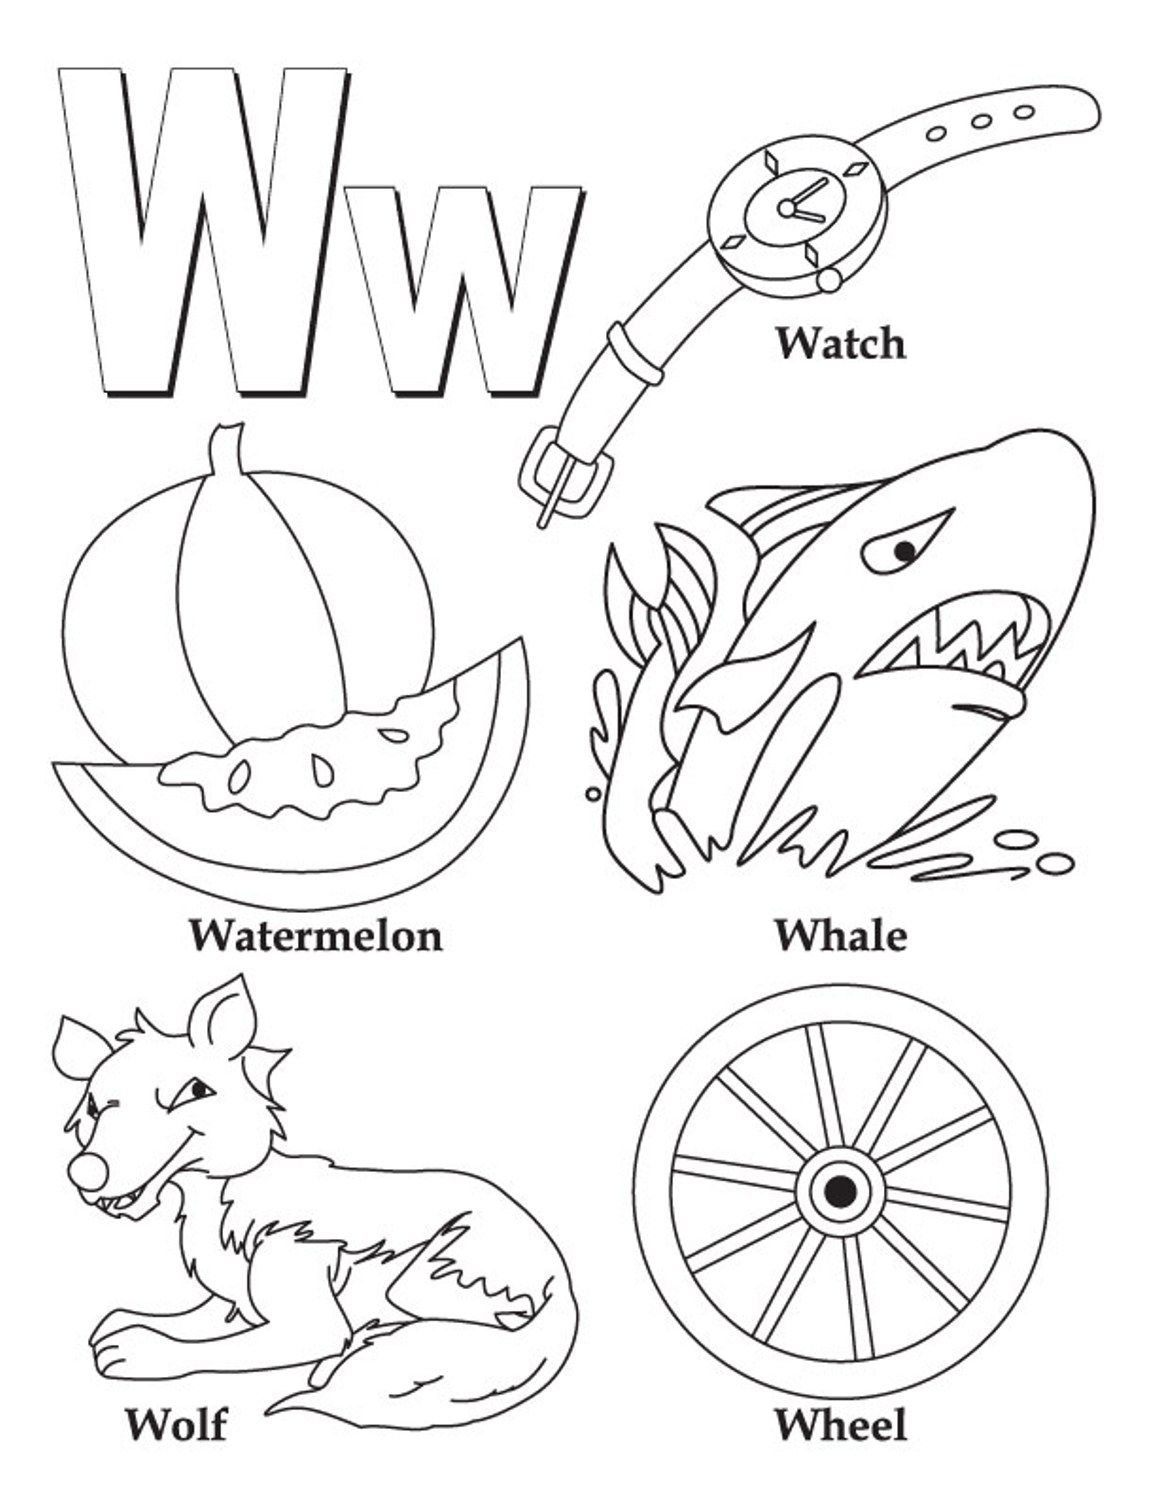 Phonics Coloring Pages at GetColorings.com | Free printable colorings